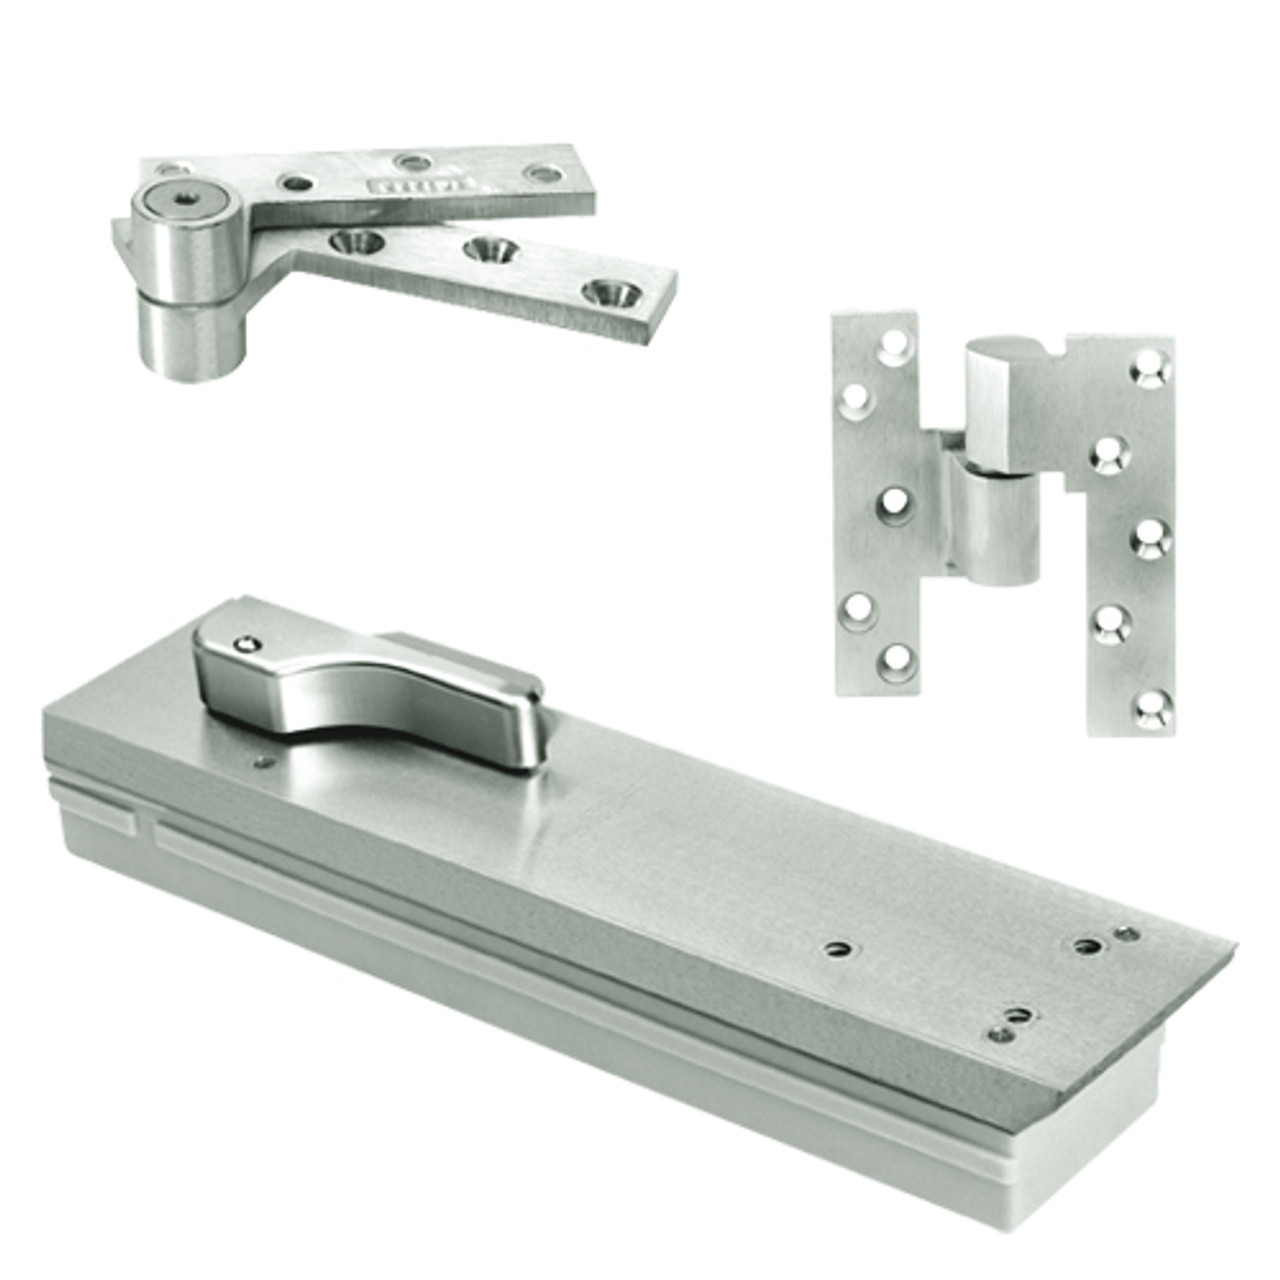 Q5105ABC90-LH-618 Rixson Q51 Series 3/4" Offset Hung Shallow Depth Floor Closers in Bright Nickel Finish